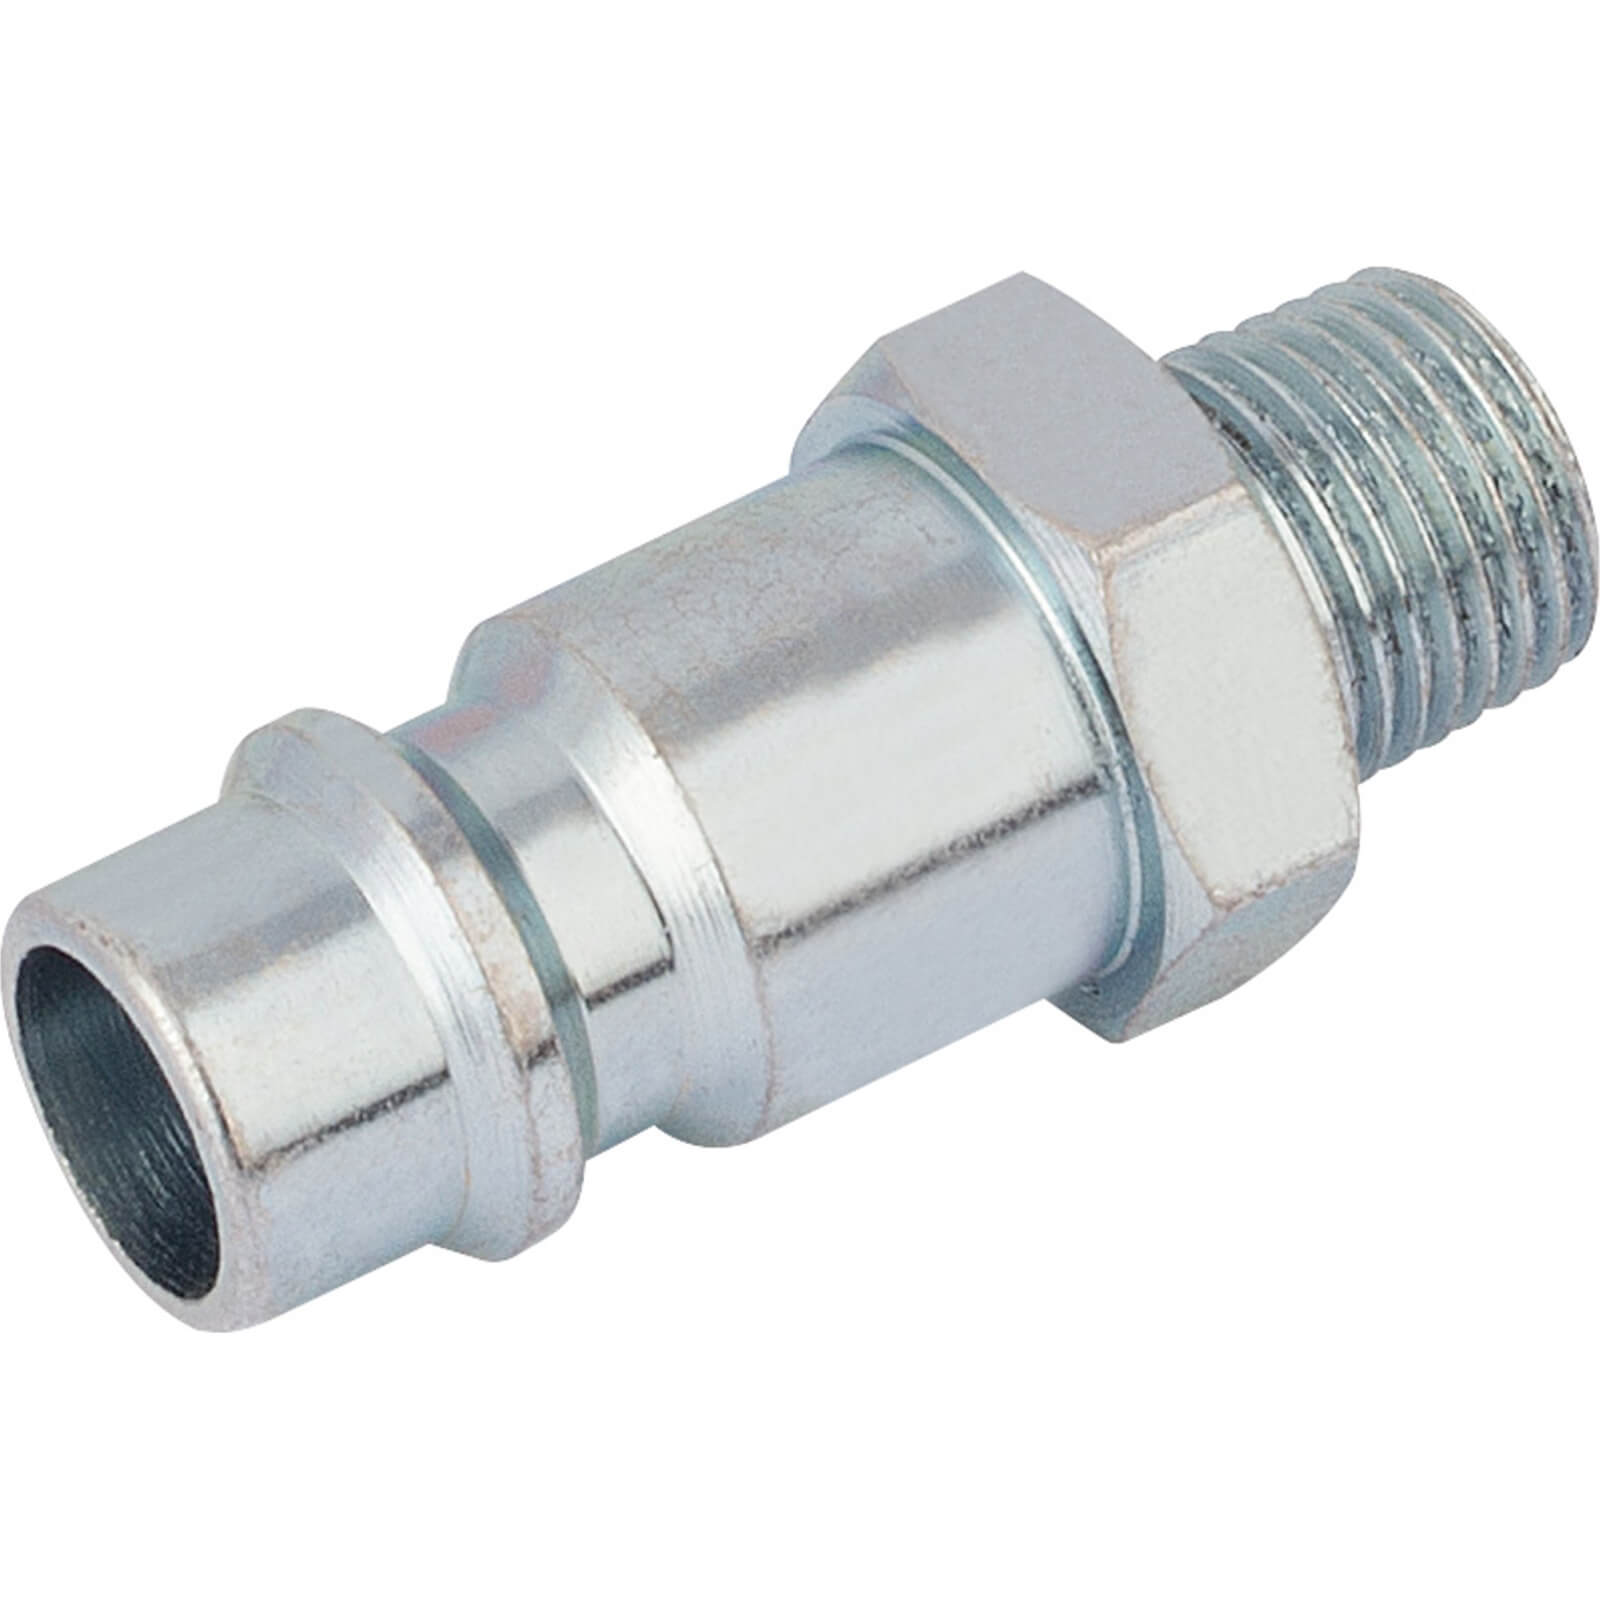 Image of Draper PCL Euro Male Nut Air Line Coupling Adaptor BSP Male Thread 1/8" BSP